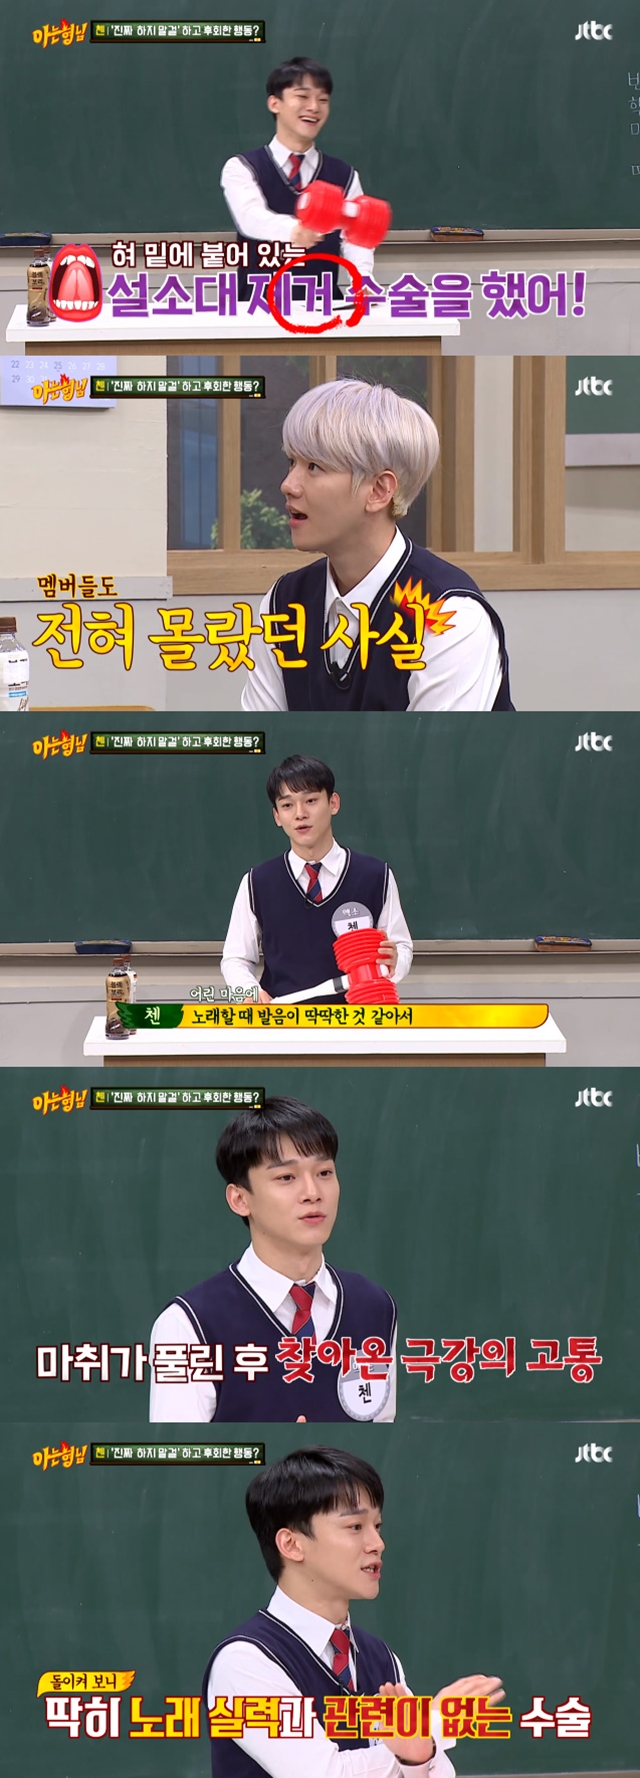 EXO Chen has said it has had surgery to remove the diarrheal zone in the past.On JTBC Knowing Bros broadcast on December 7, Chen confessed that he had surgery to remove the diarrhea because he wanted to sing well.Chen said, I wanted to sing well in high school, so I had surgery to remove the diarrhea.I was surprised by the secret of Chen, who did not know the members of Knowing Bros as well as EXO members.Park So-hee